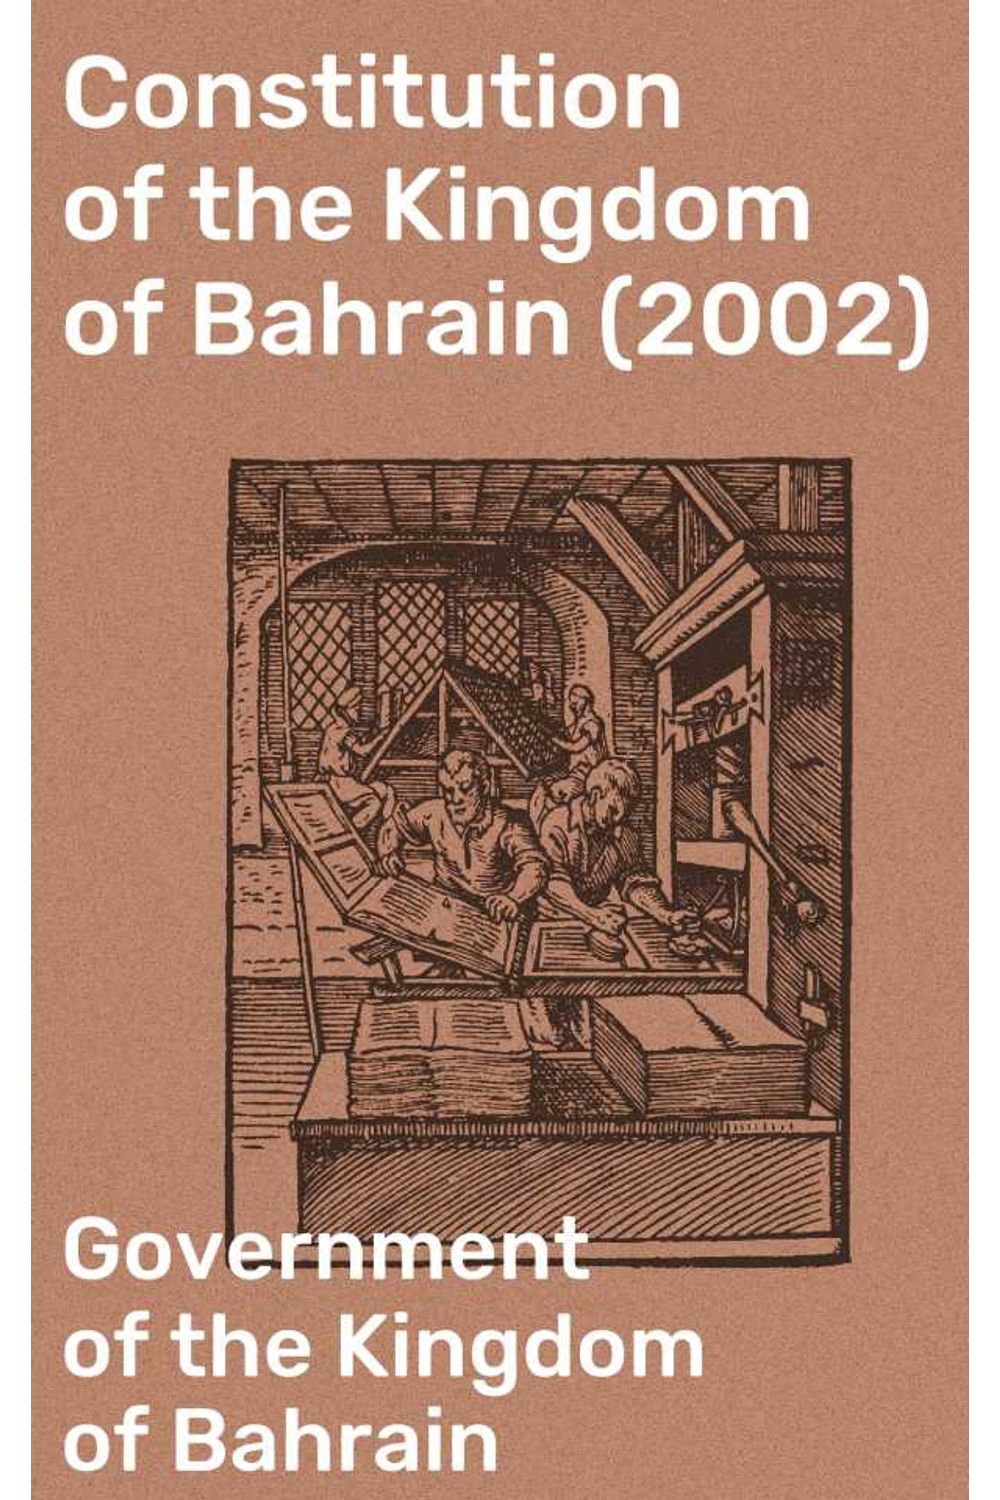 bw-constitution-of-the-kingdom-of-bahrain-2002-good-press-4064066404949